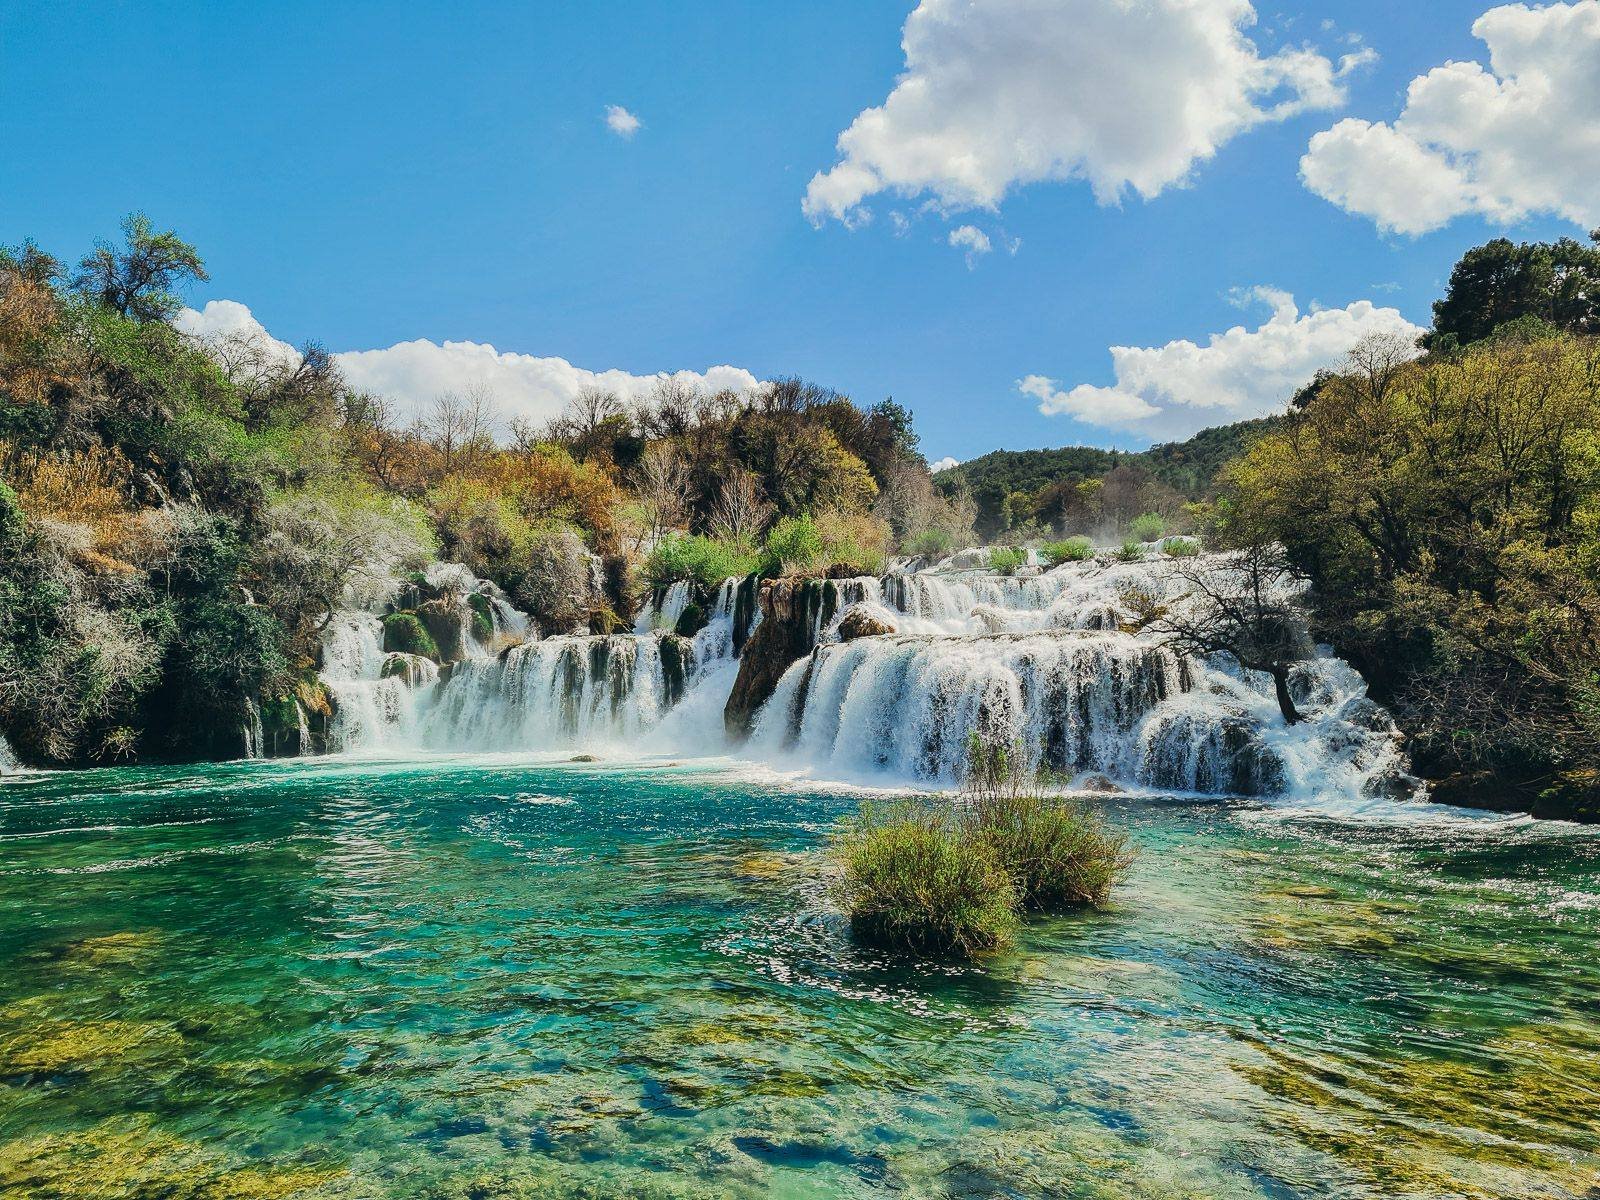 cascading waterfalls into a bright green lake and surrounded by lush greenery in Krka Waterfalls National Park near Sibenik in Croatia